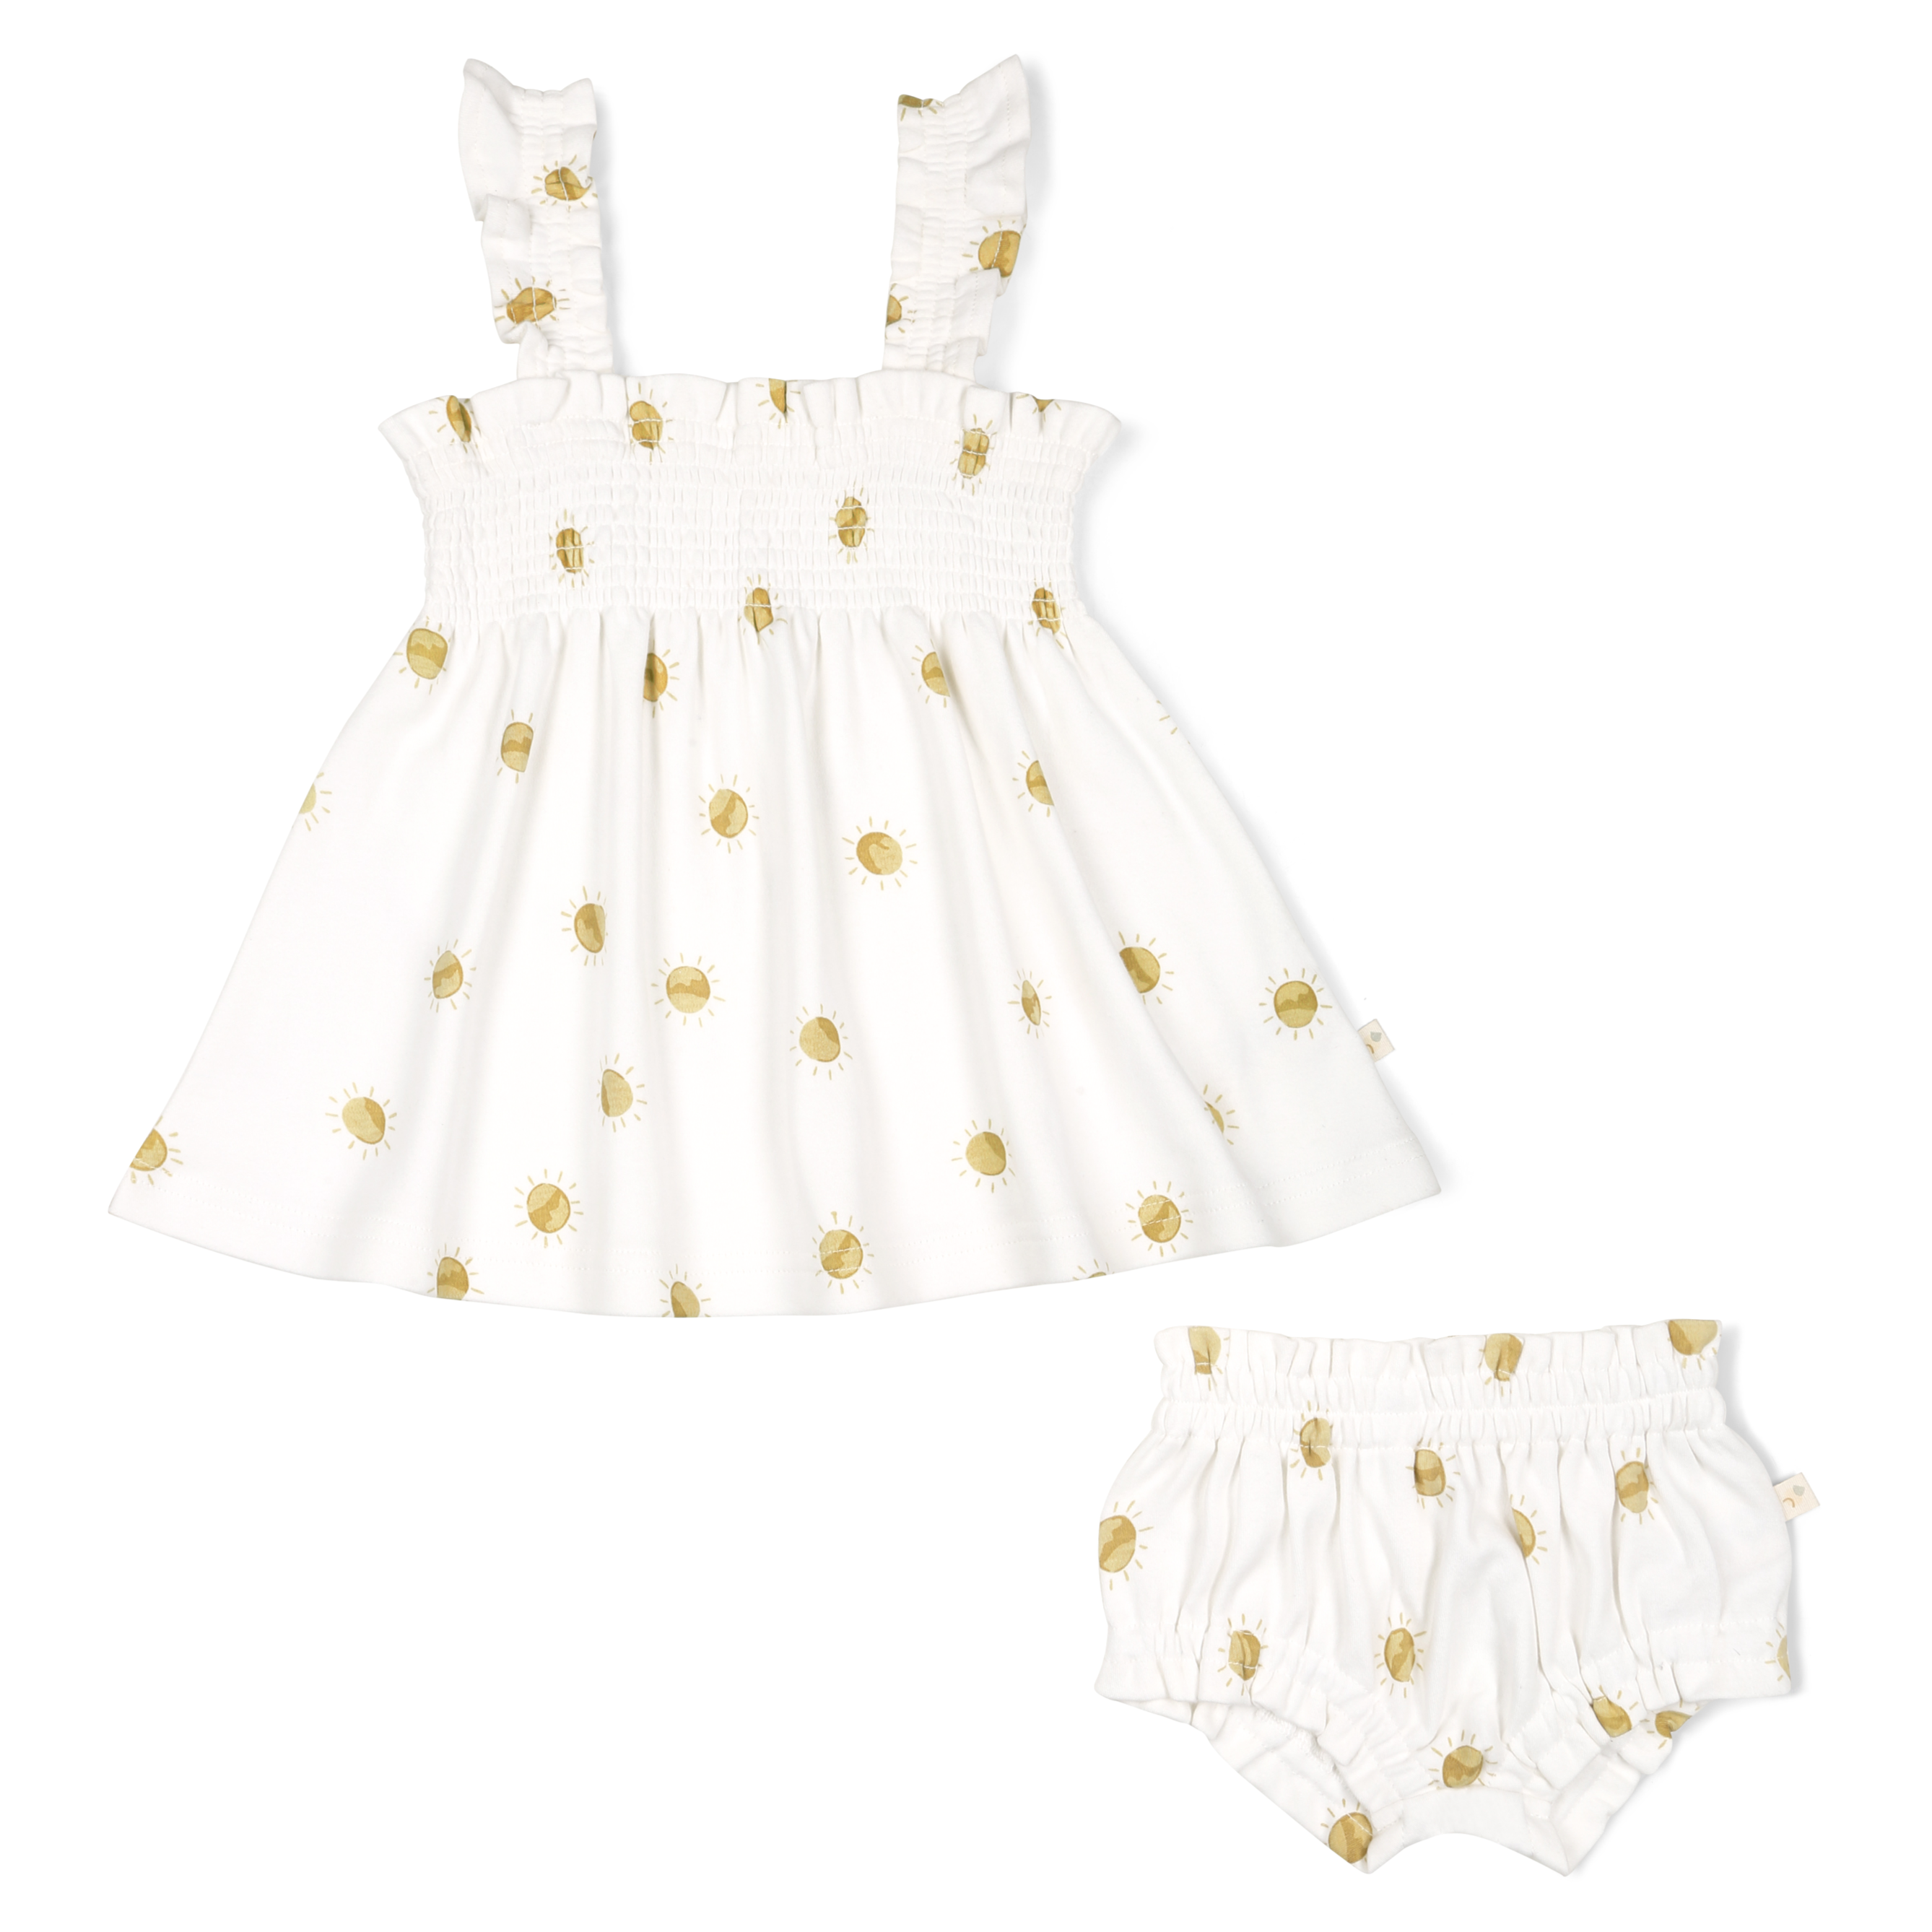 Organic Smocked Dress - Sunshine by Makemake Organics and matching bloomers with golden polka dots and ruffled sleeves isolated on a white background.